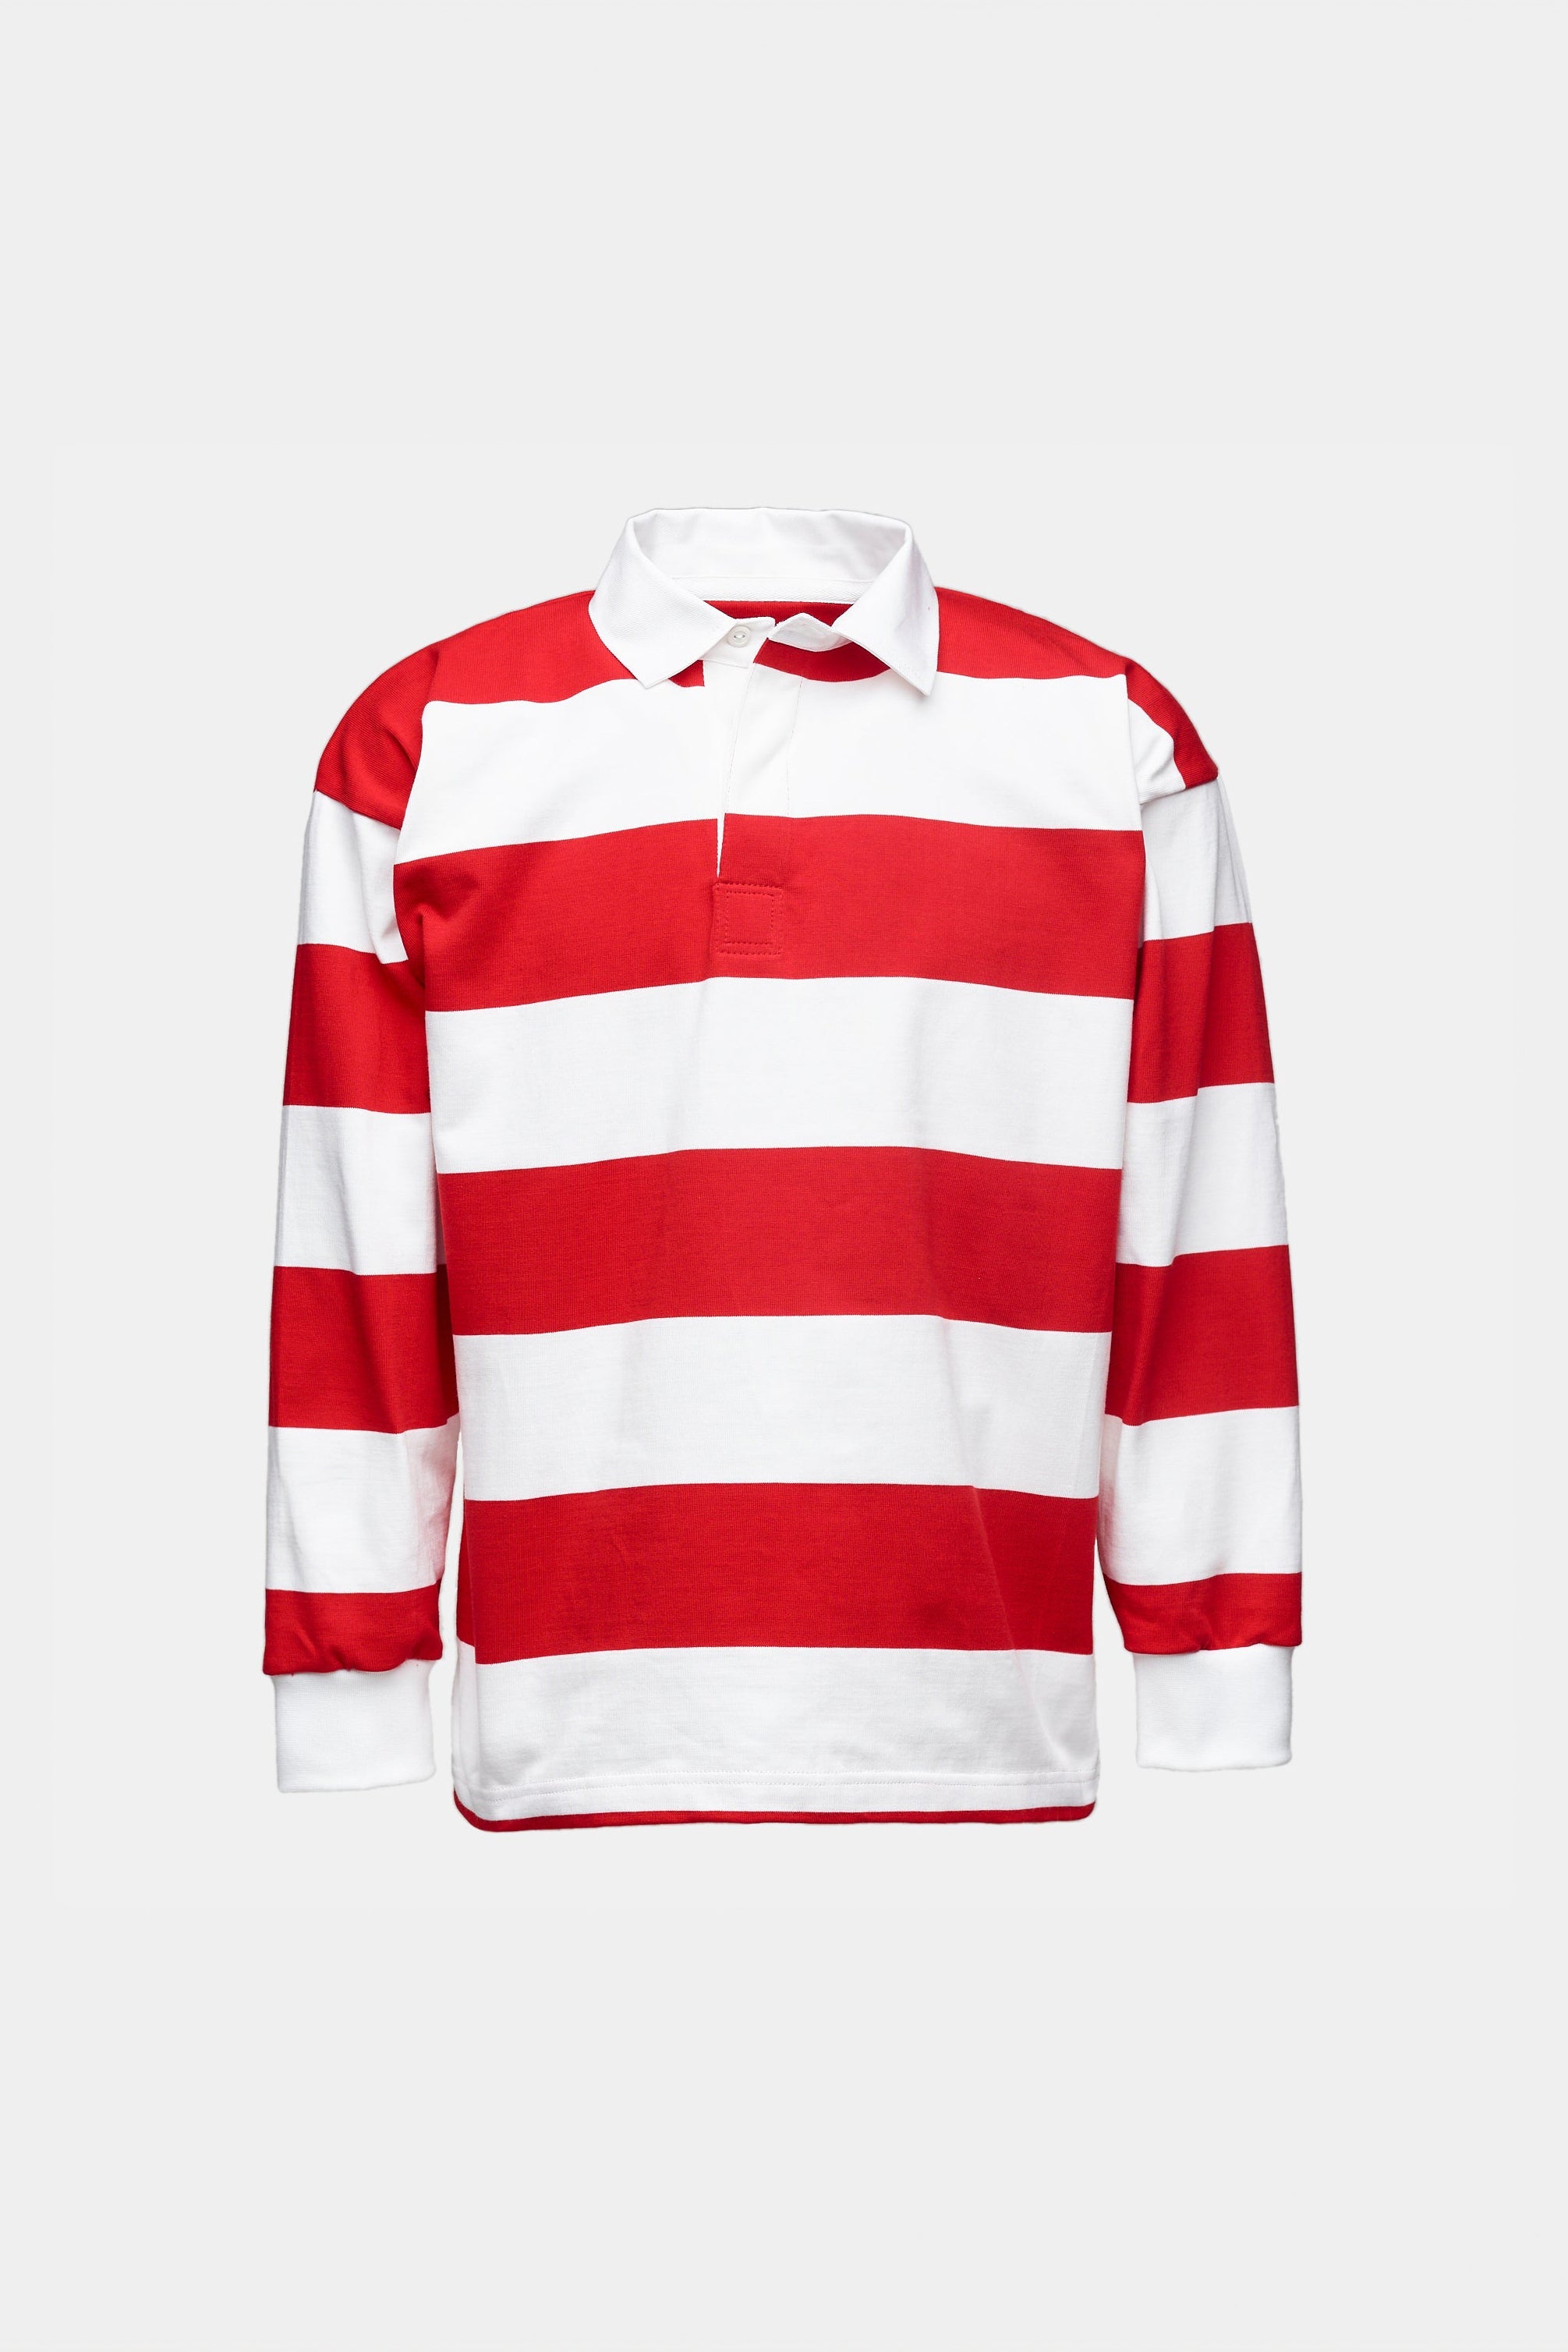      Male_Wider-Stripe-Rugby-Shirt_Red-White_Mannequin